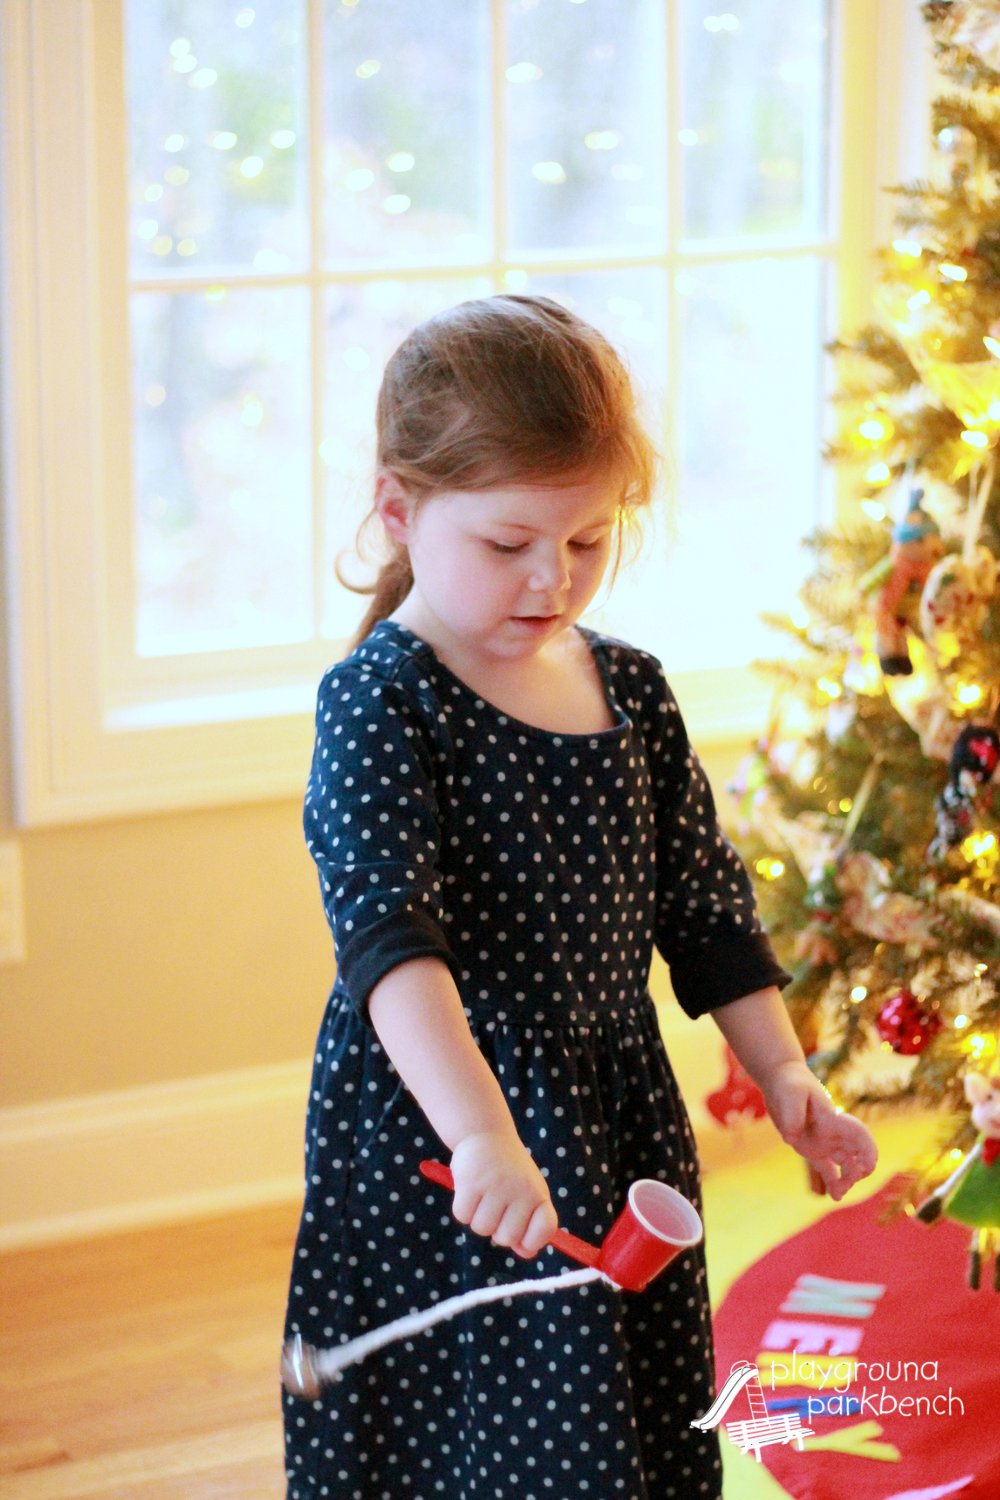 Cup and Jingle Bell Holiday Games - Great for Eye-Hand Coordination